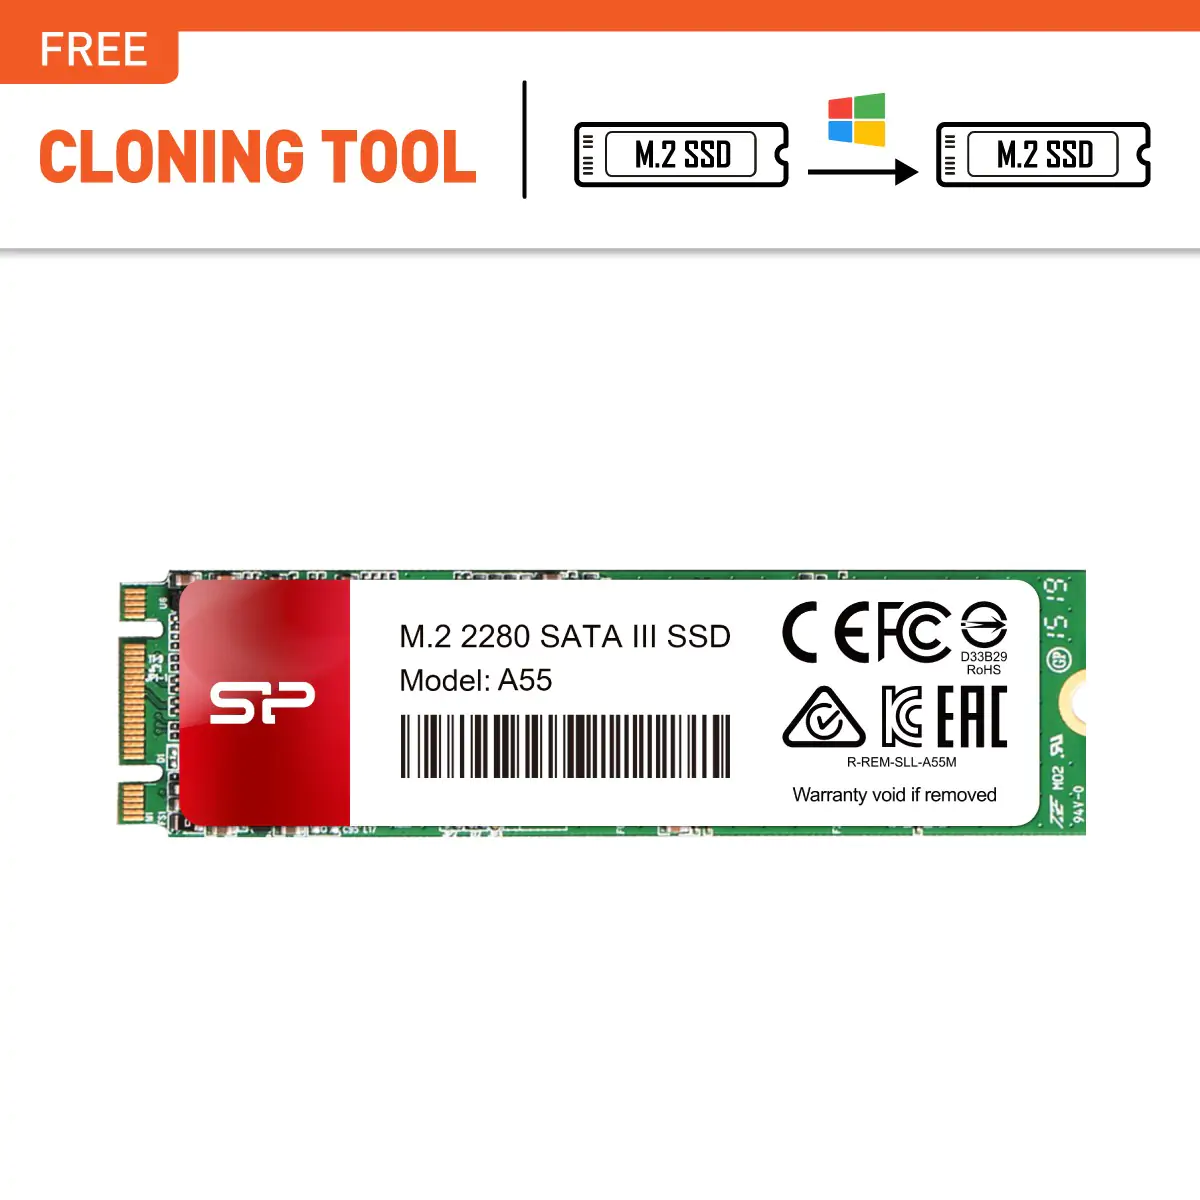 Silicon Power 512 GB Ace SP A55 2.5 SATA Solid State Drive SSD